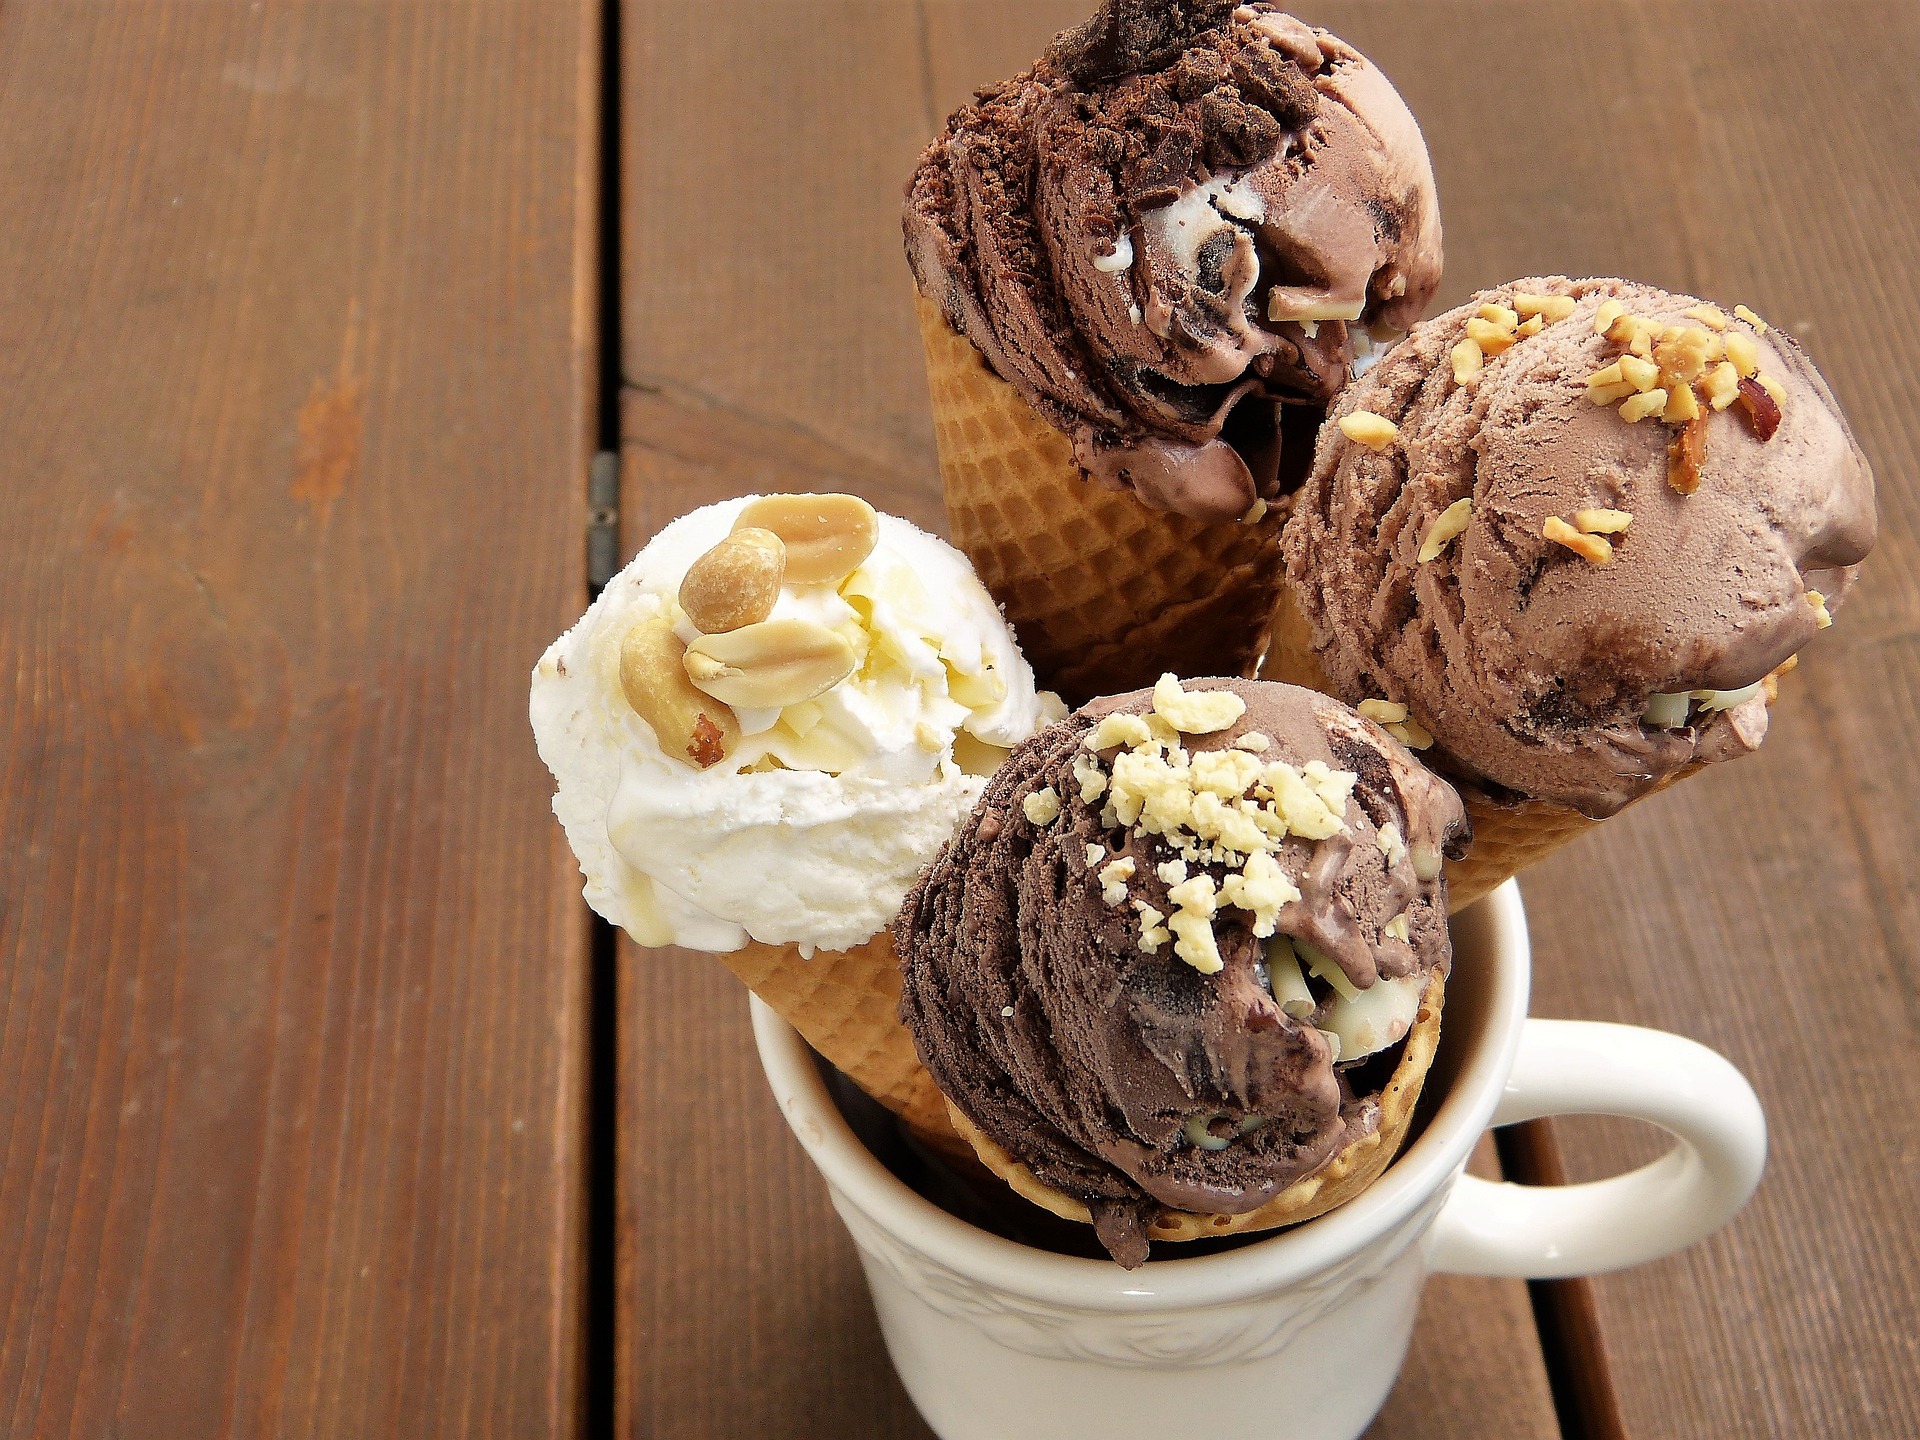 Four icecreams, topped with nuts, in a mug.  Our No Win No Fee Allergy compensation solicitors can assist with making a No Win No Fee compensation claim if you've suffered from an allergic reaction due to undisclosed allergens.